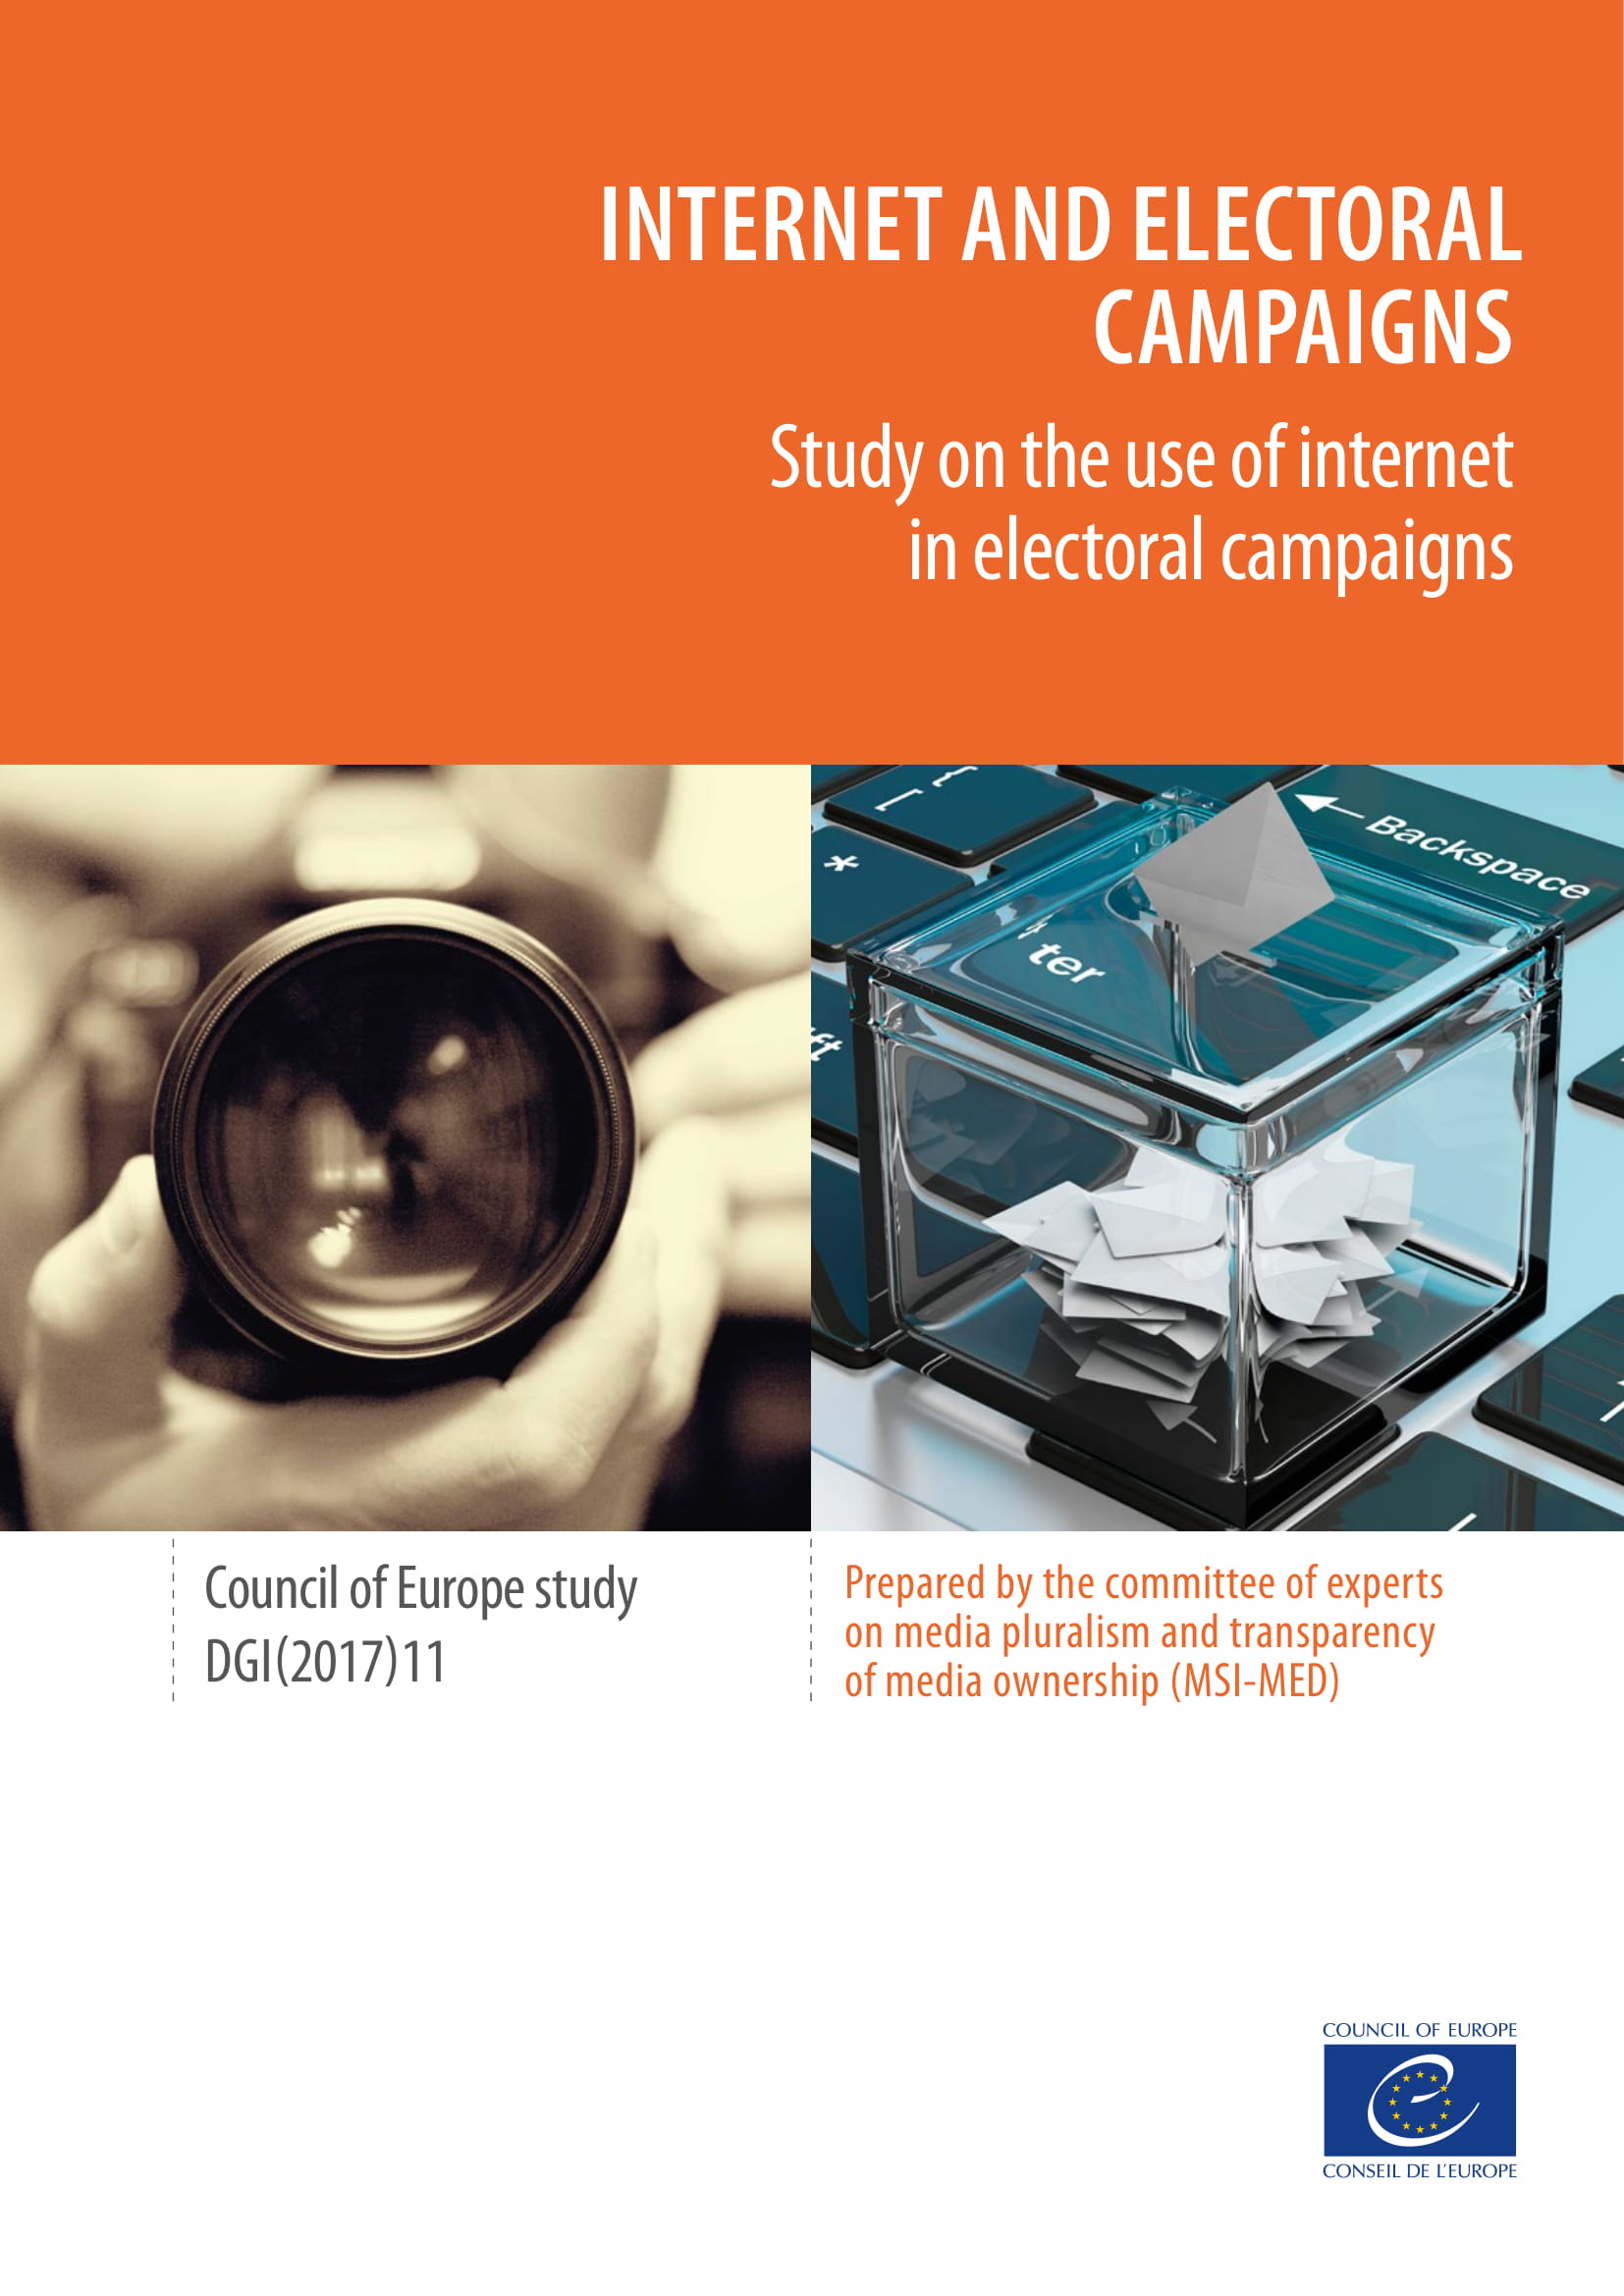 Internet and Electoral Campaigns - Study on the use of internet in electoral campaigns